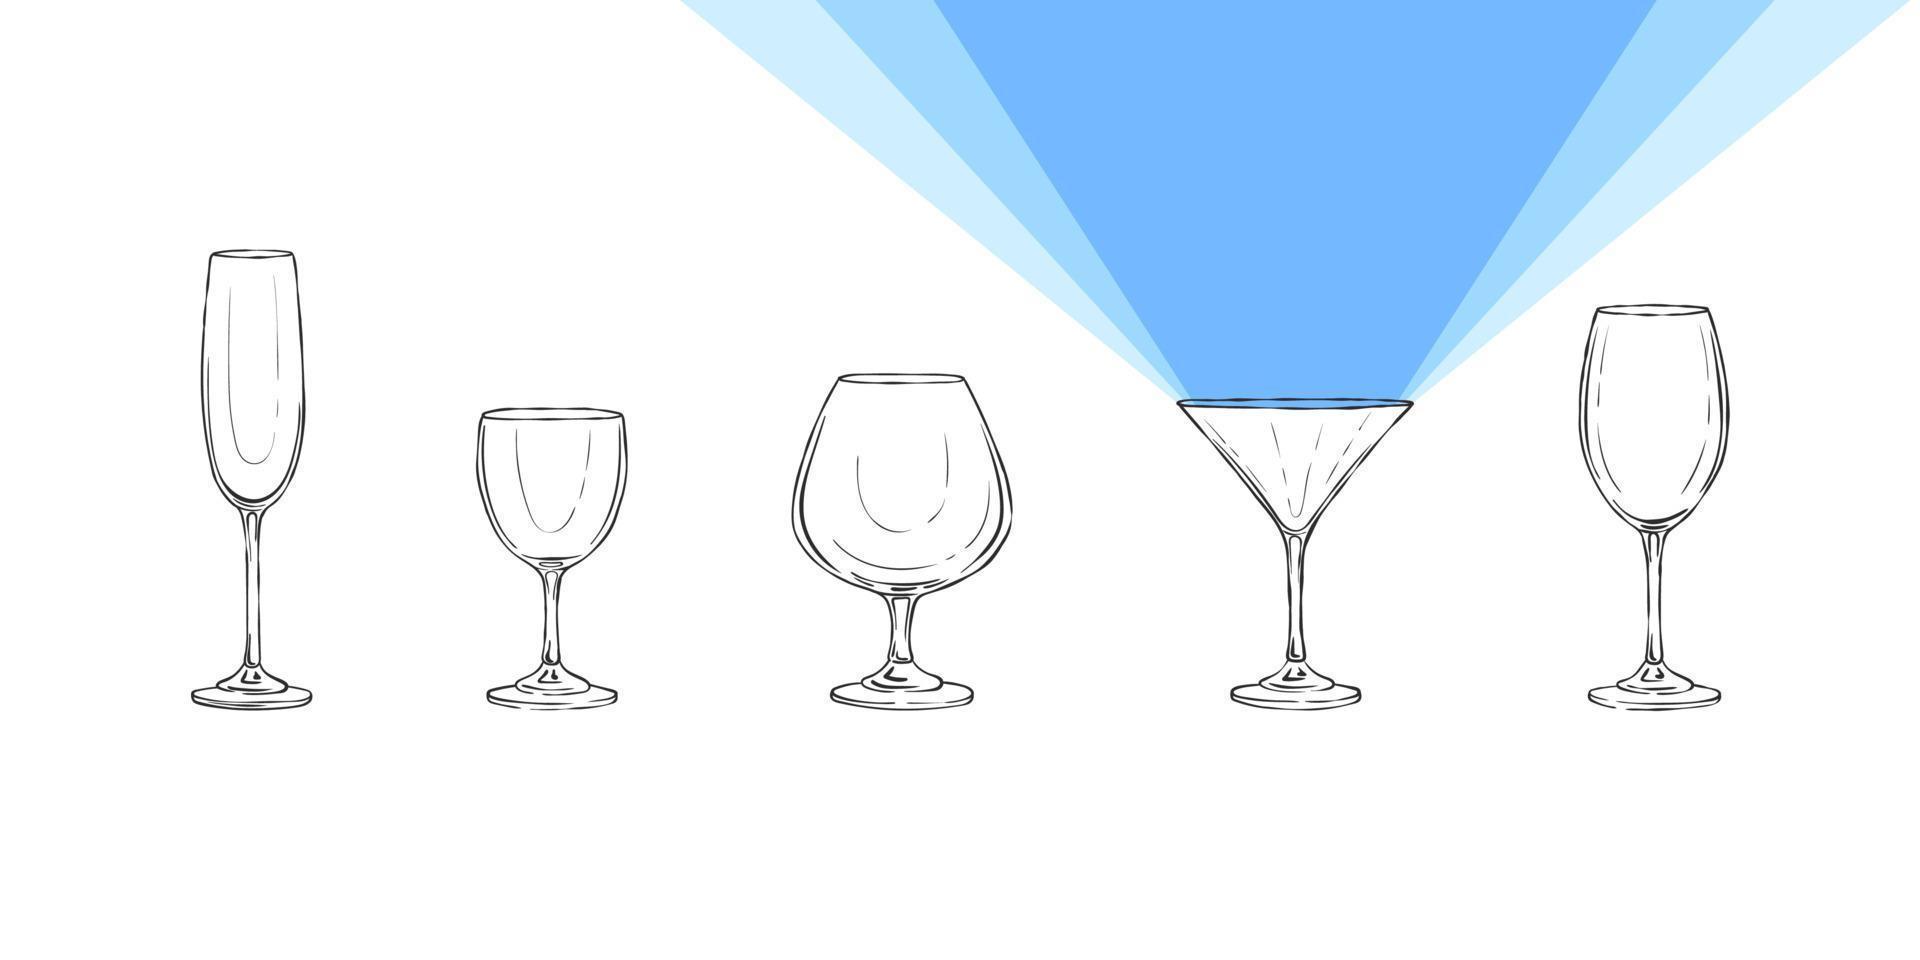 Light from the glass. Glasses drawn by hand with a beam of light. Vector illustration